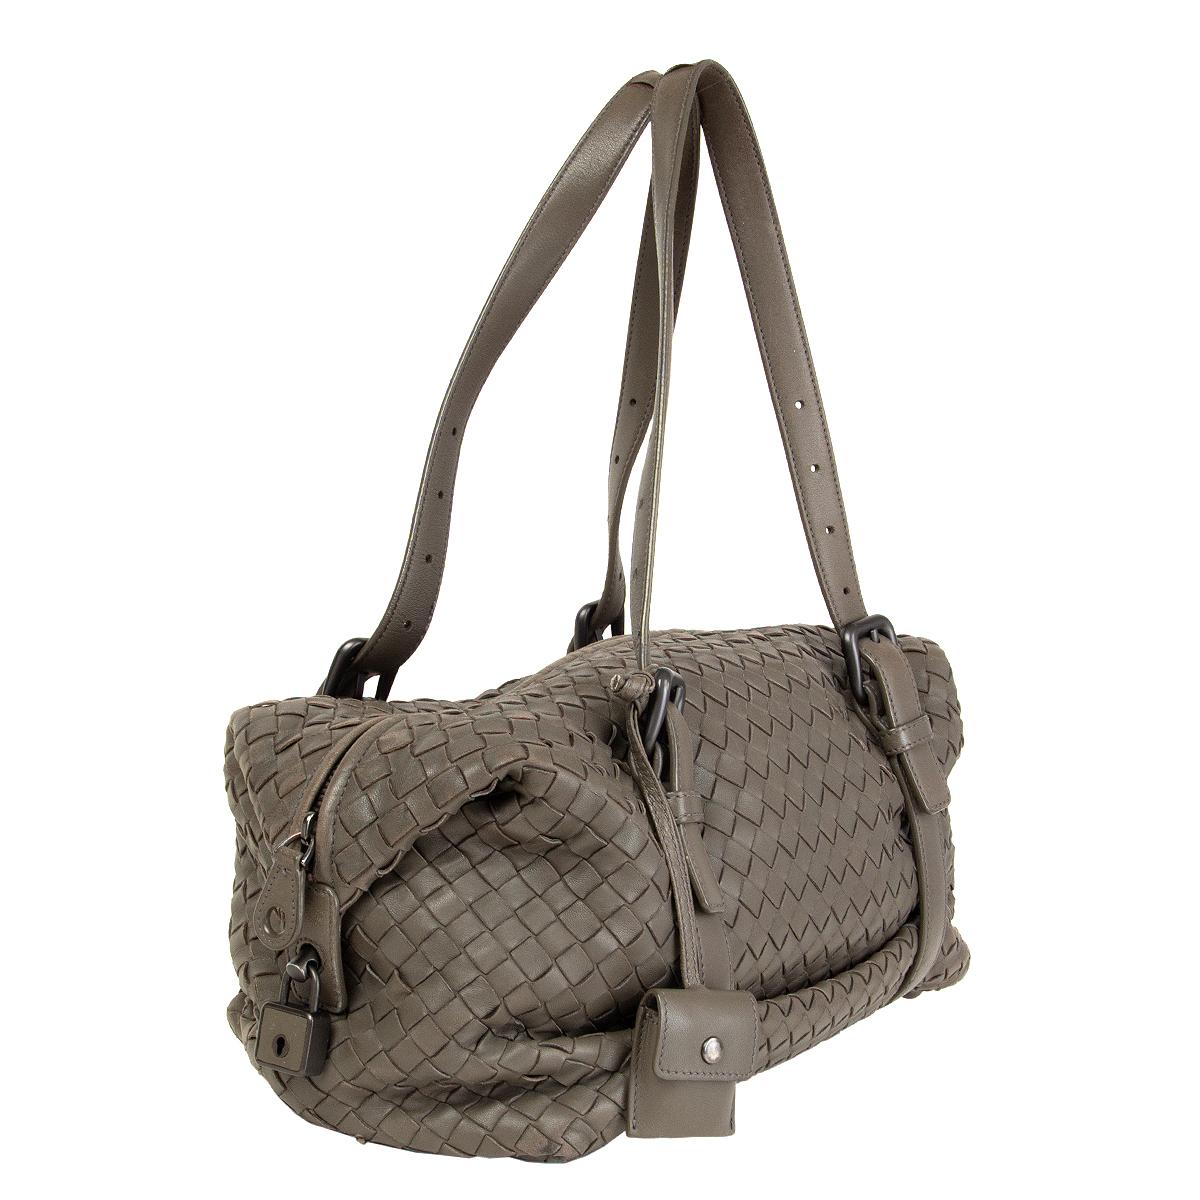 100% authentic Bottega Veneta 'Intrecciato Nappa Montaigne' shoulder bag made of olive-taupe double-sided intrecciato nappa, The bag has adjustable handles and a zip fastener with a small padlock. The keys are safely concealed in an elegant leather